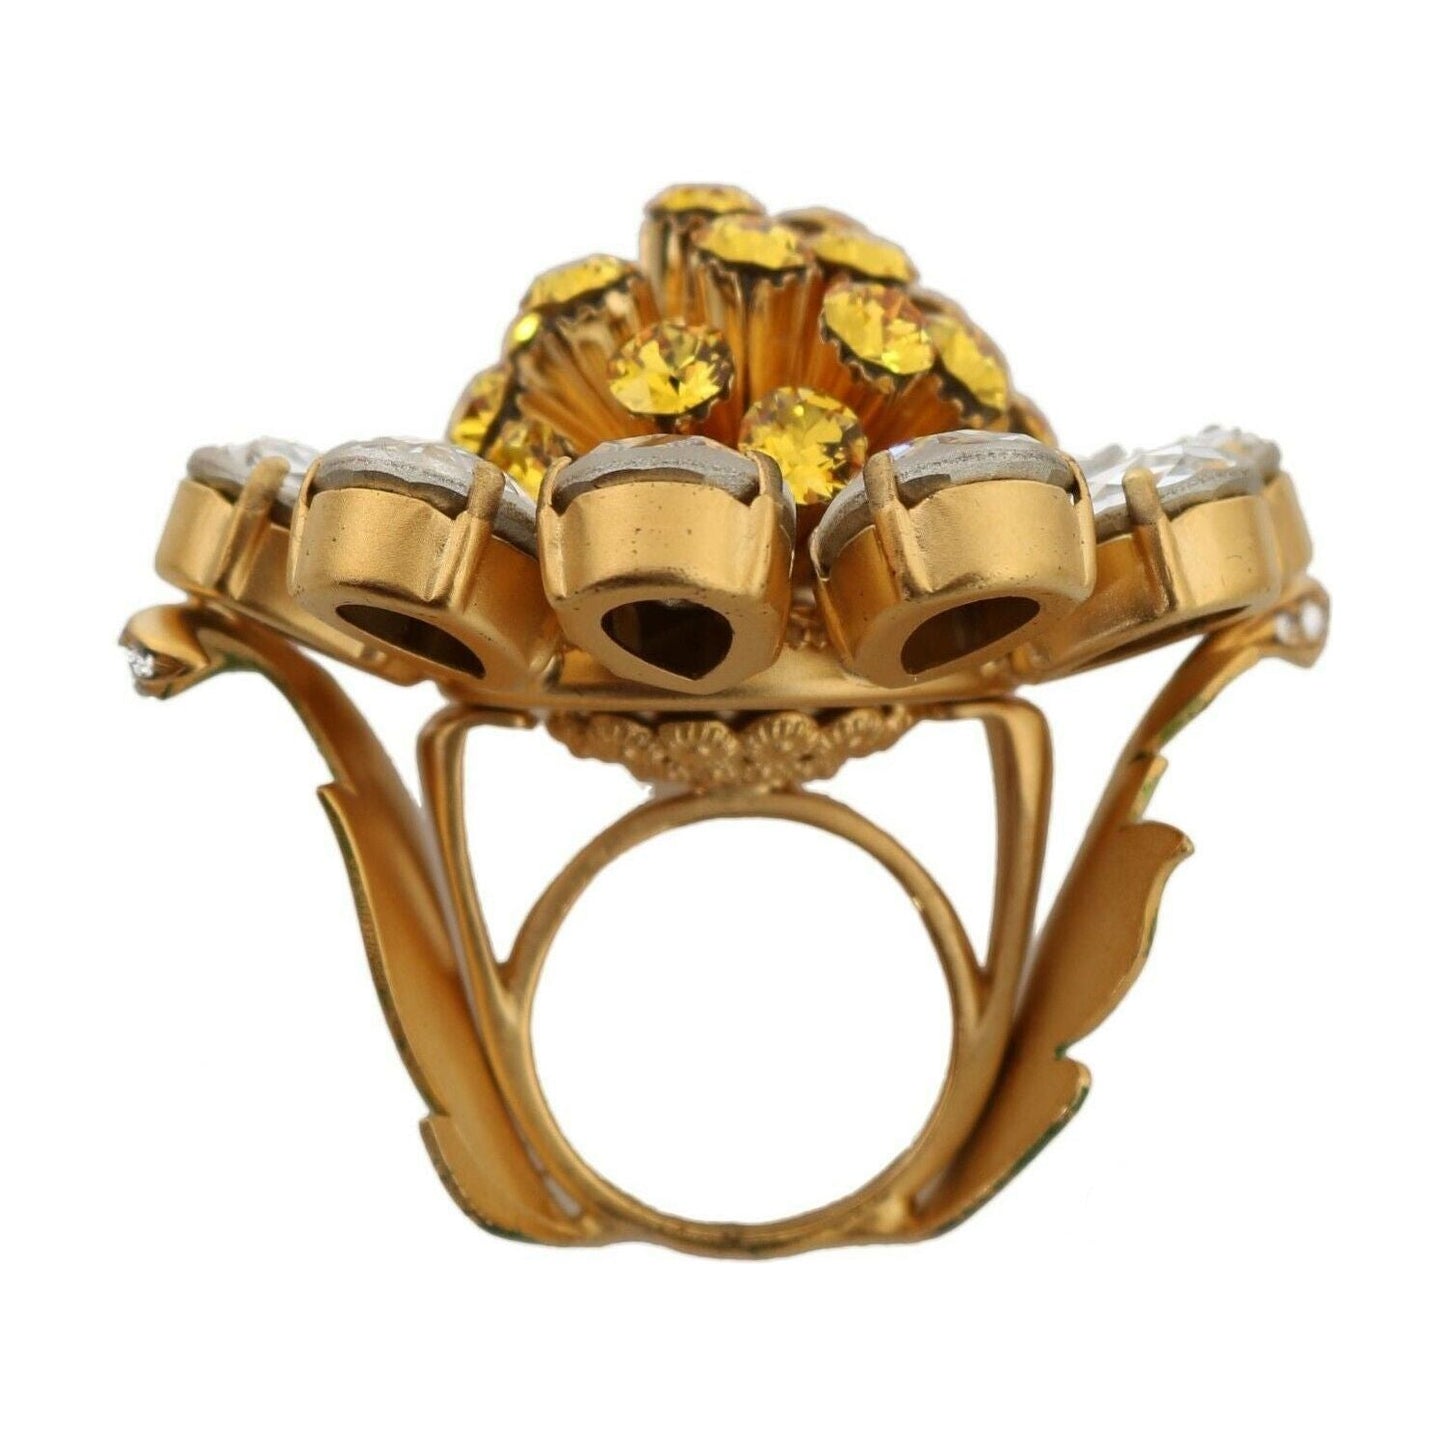 Dolce & Gabbana Crystal Flower Statement Ring Size US 7.5 gold-brass-yellow-crystal-flower-ring